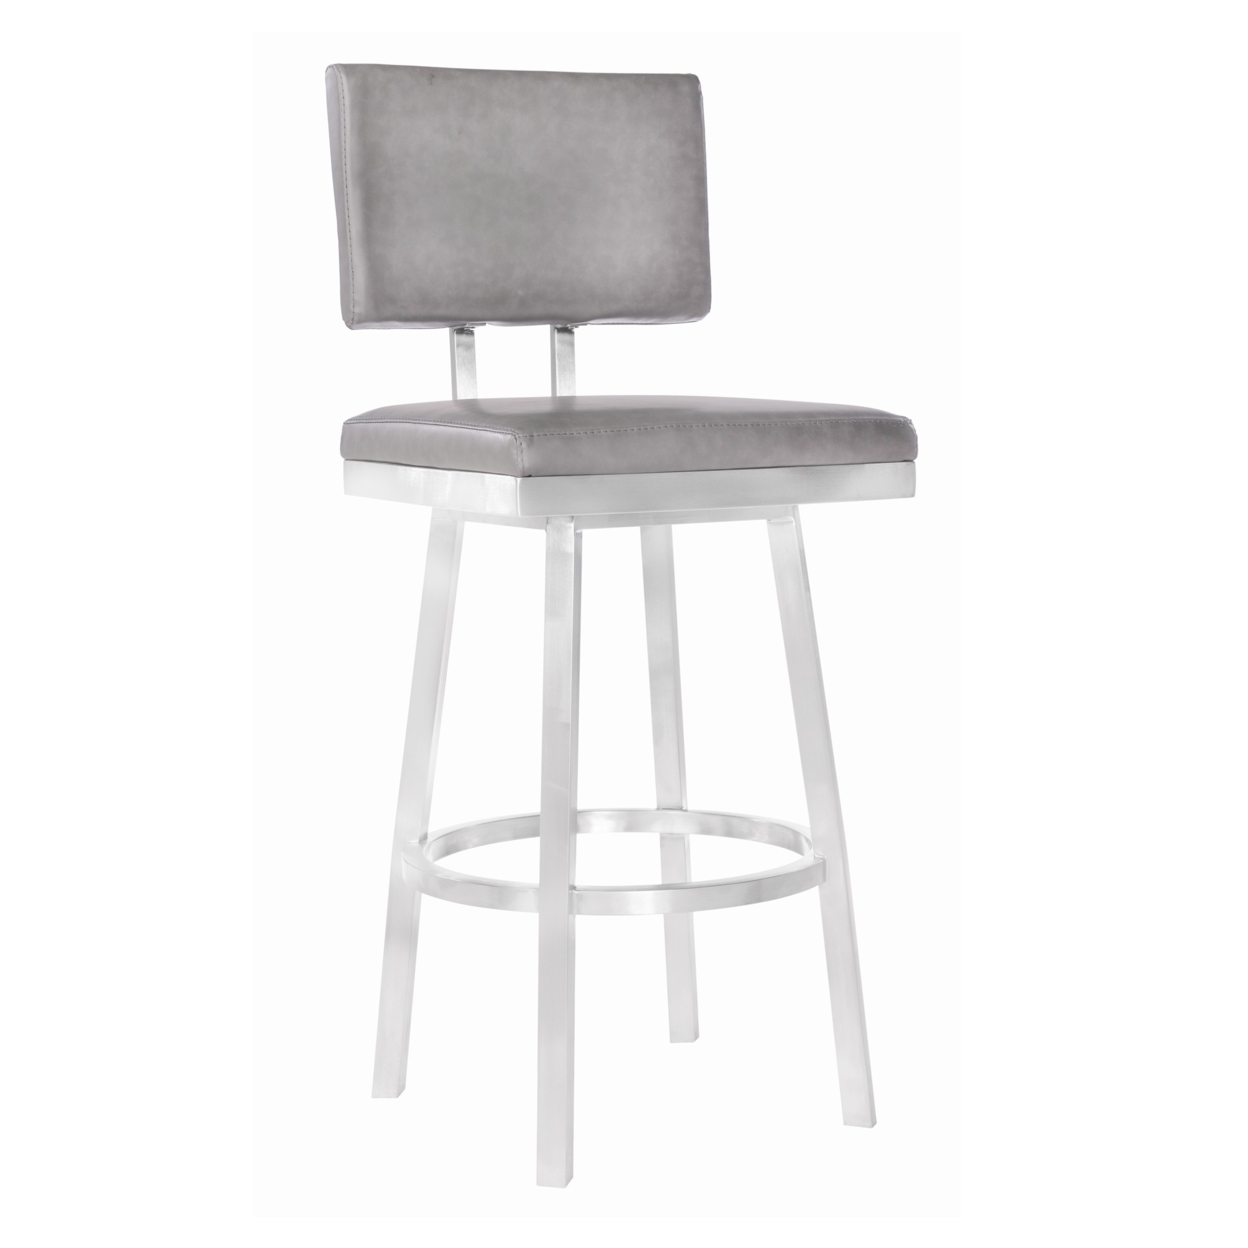 Leatherette Counter Height Armless Barstool With Swivel Mechanism, Silver- Saltoro Sherpi